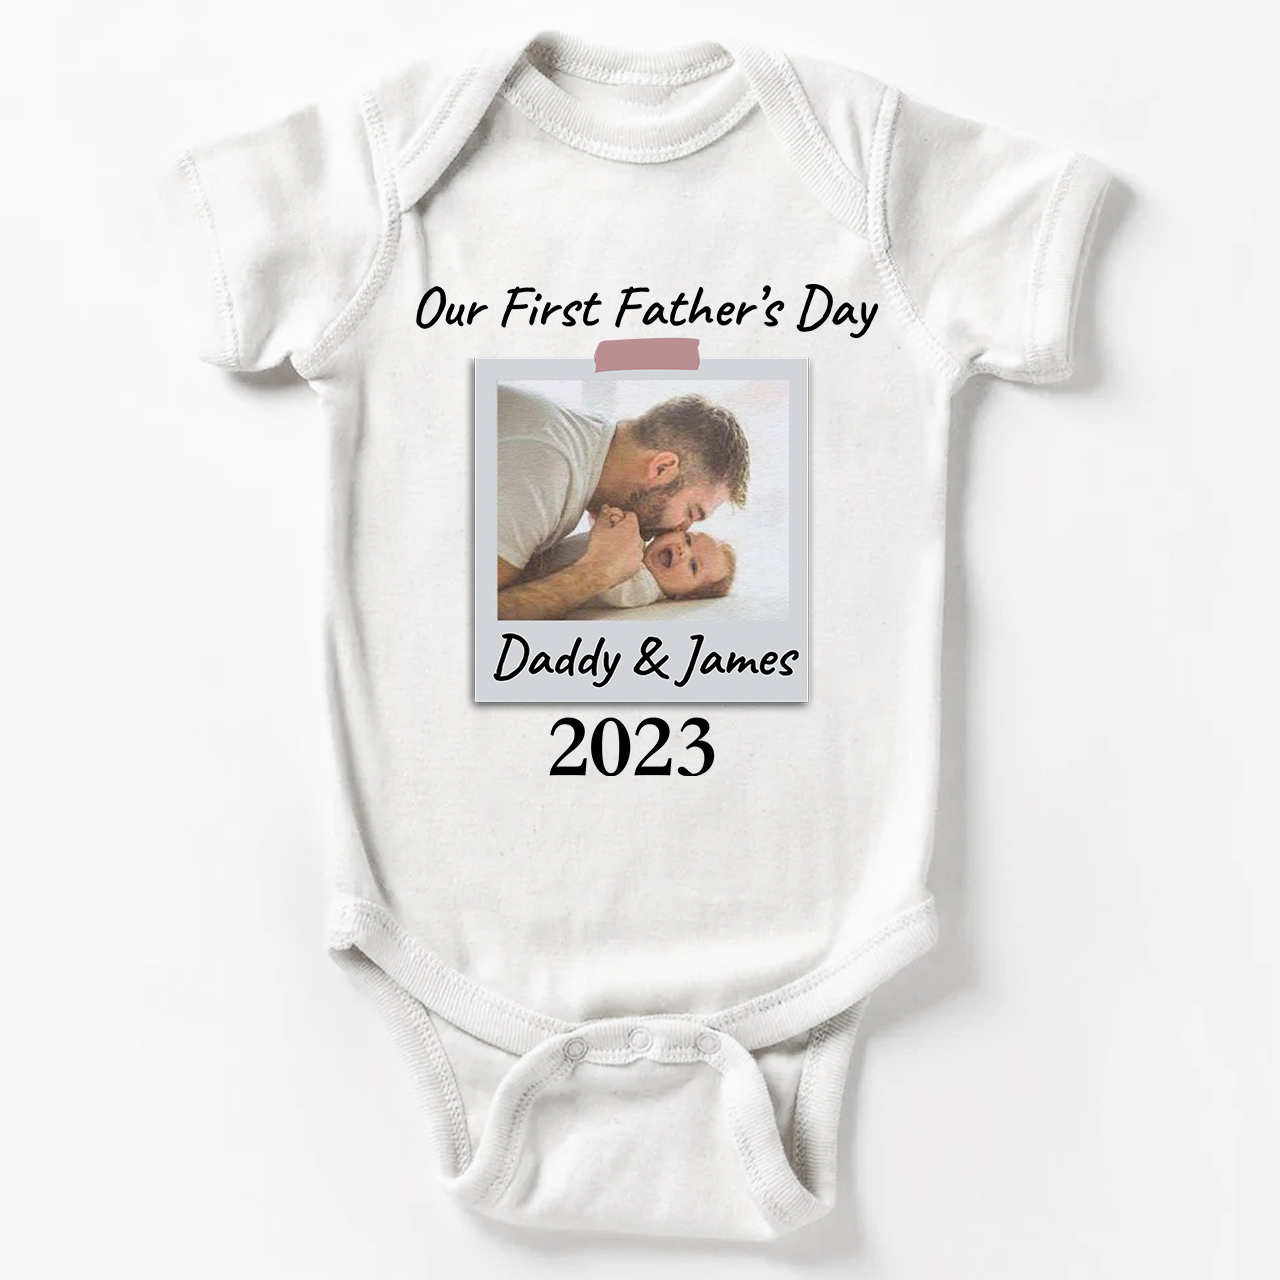 Our First Father's Day 2023Baby Bodysuit